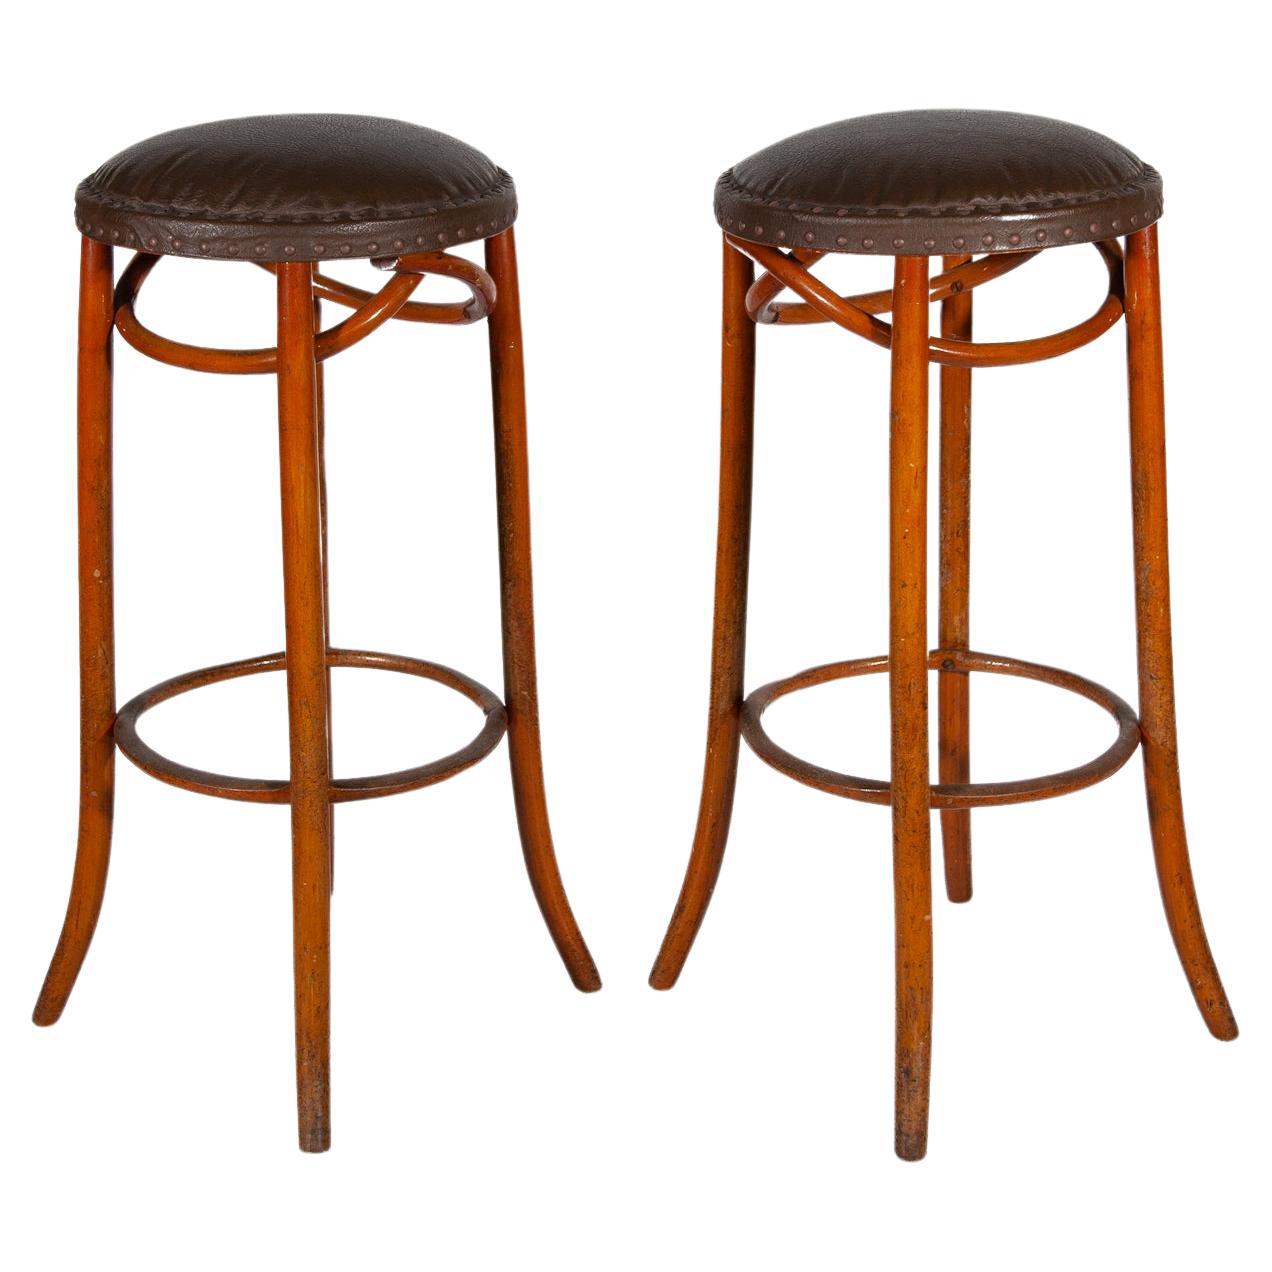 Set of Two Thonet Bentwood Cafe Bar Stools and Padded Leather Seat.